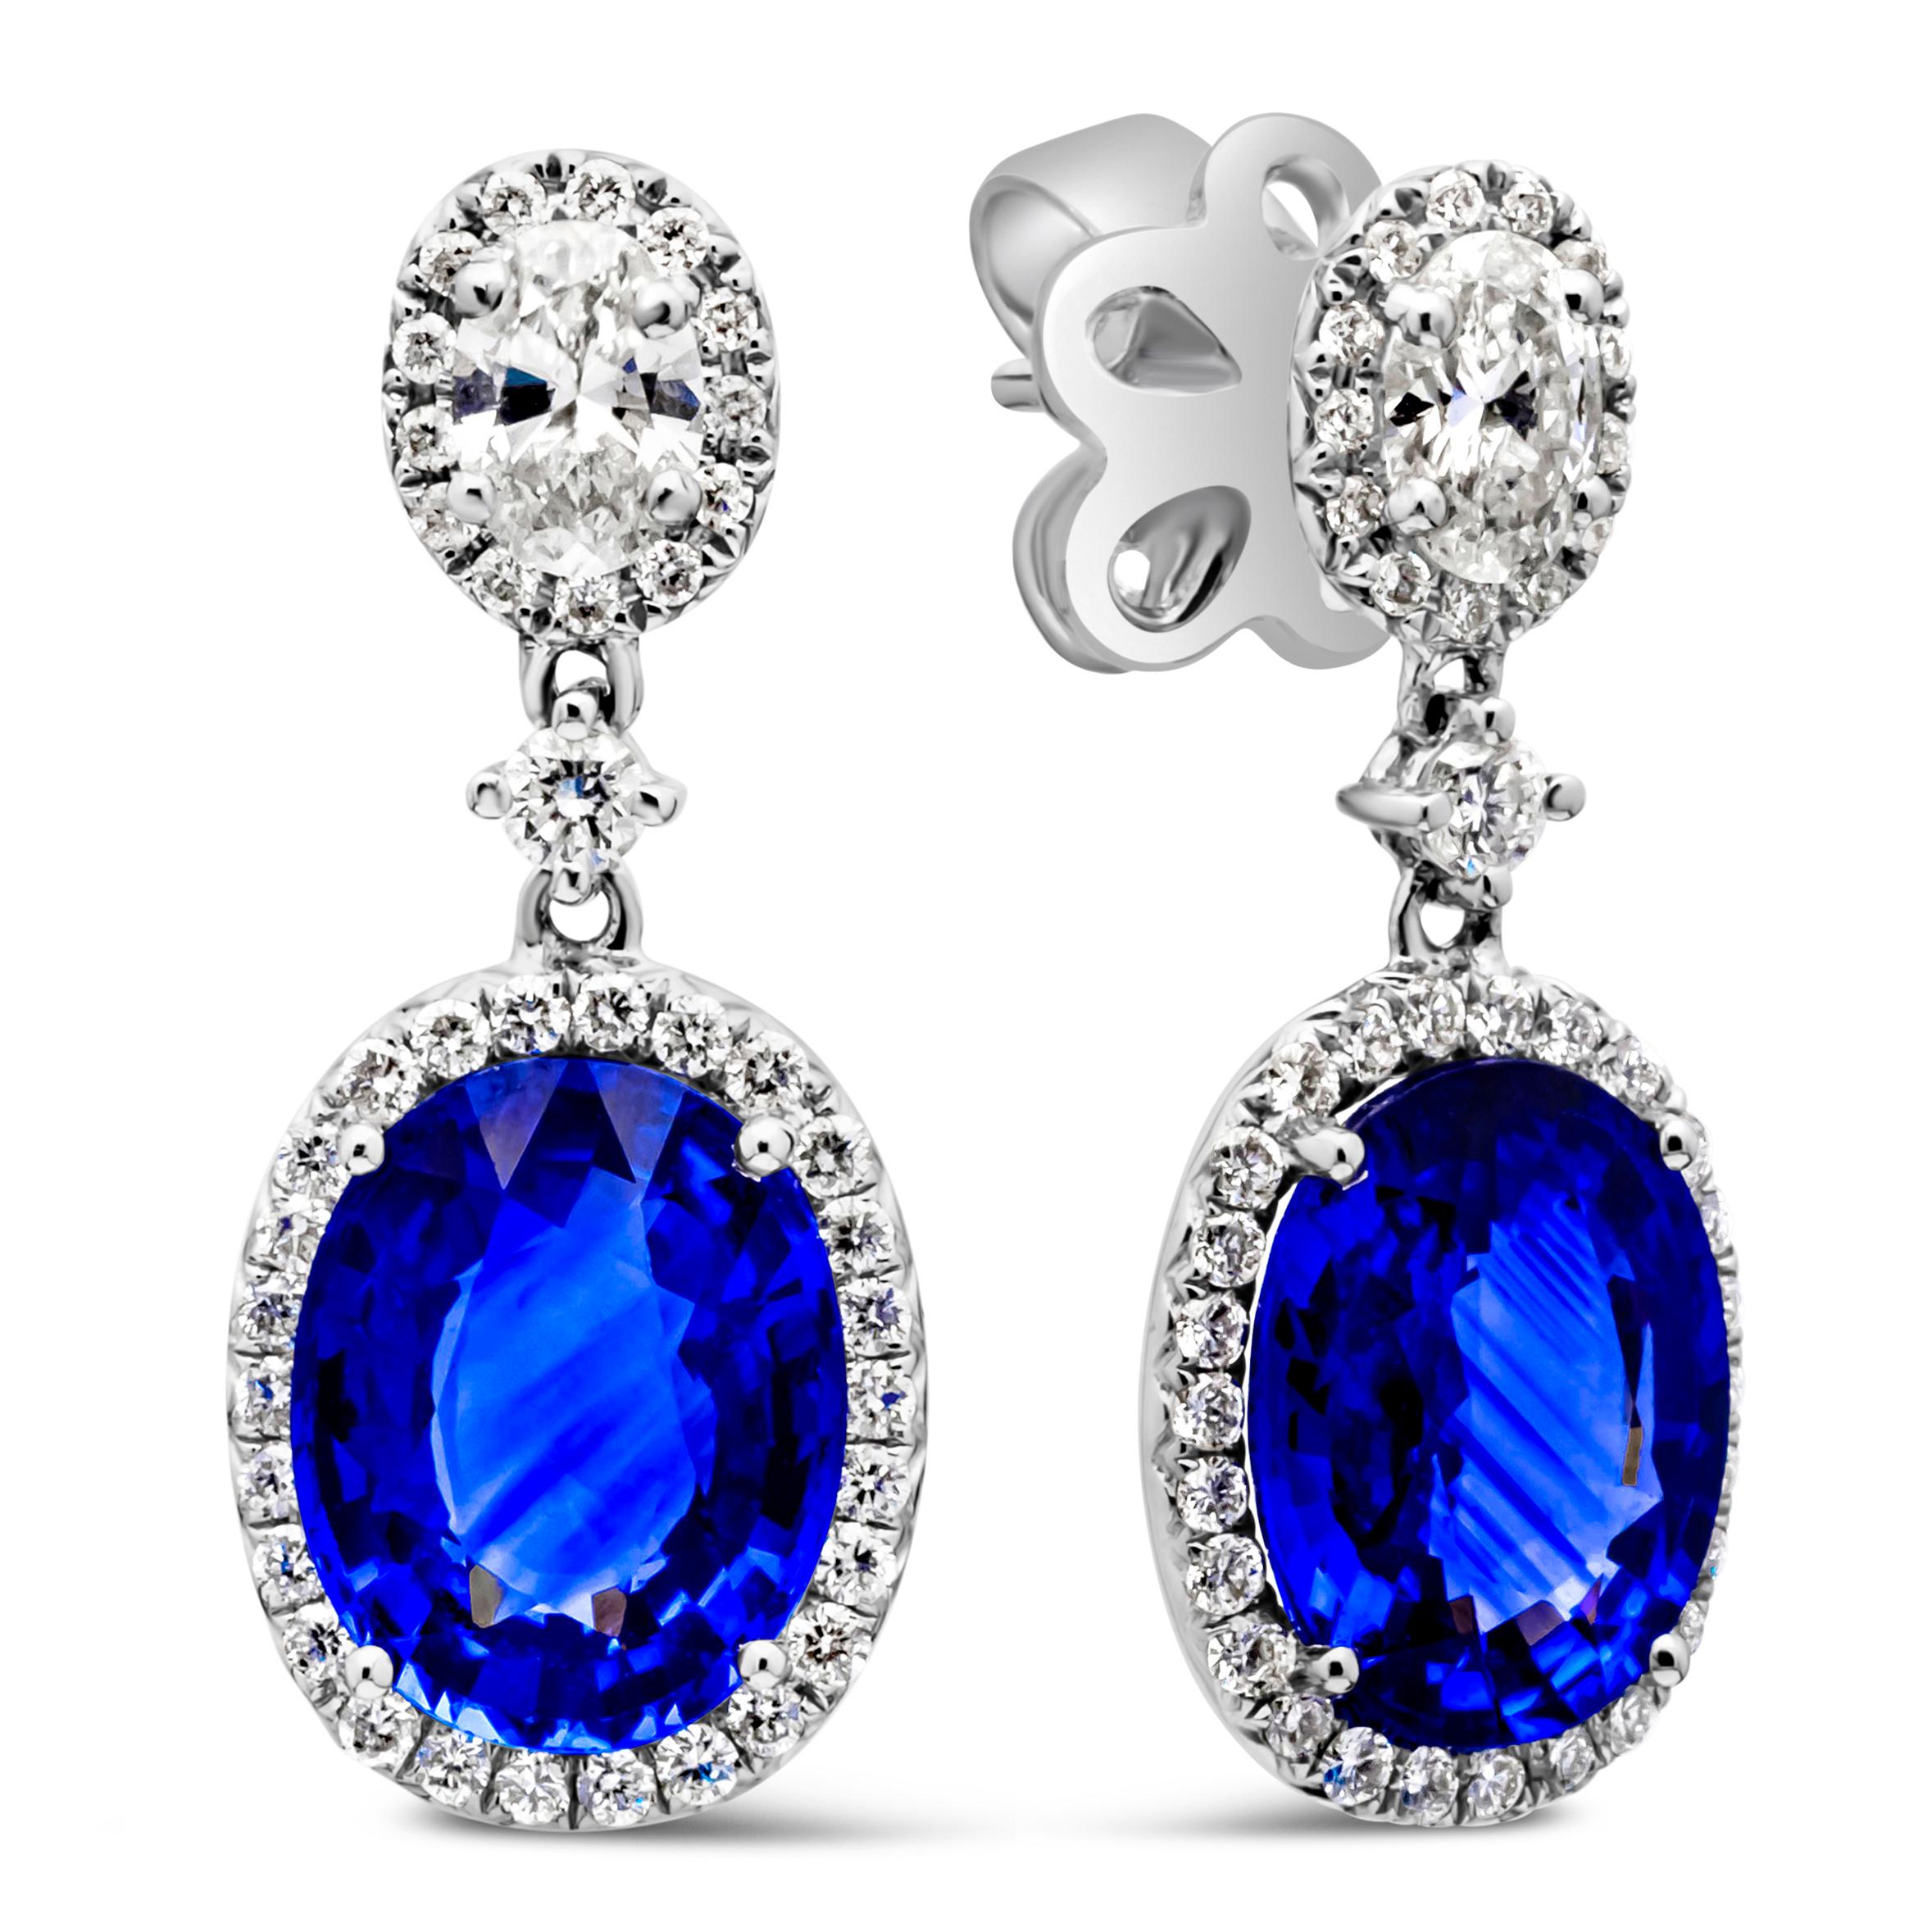 A beautiful and vibrant pair of dangle earrings, showcasing color-rich blue sapphires weighing 4.38 carats total, elegantly set with a halo of round brilliant cut diamonds. Suspended on oval cut diamonds also set with a diamond halo and spaced with